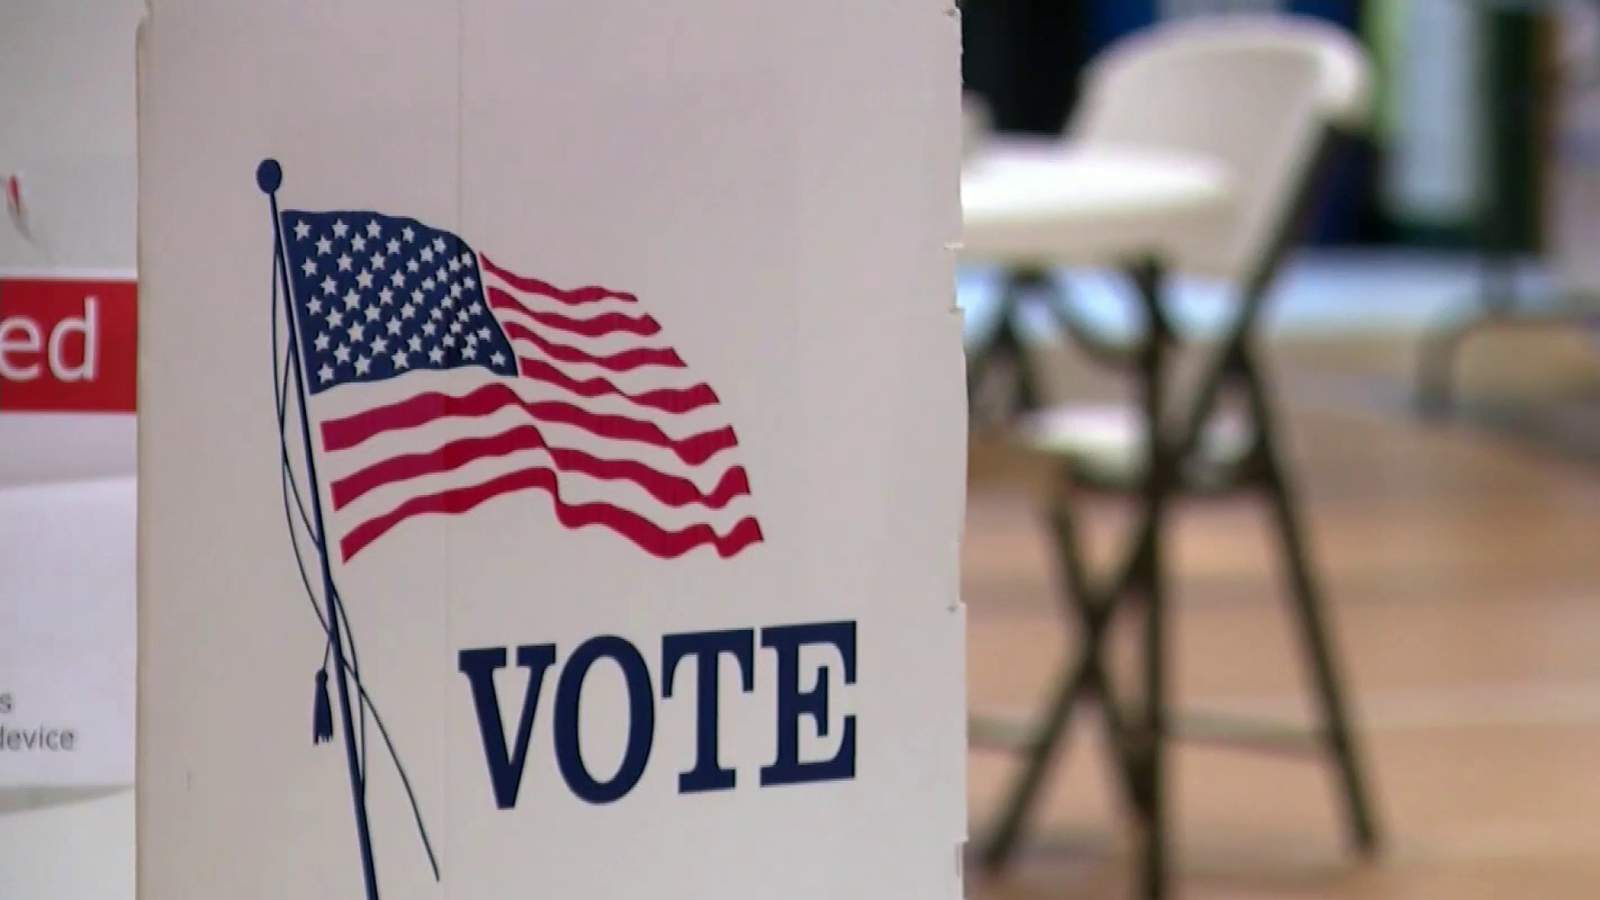 November election: What do you need to know before voting?